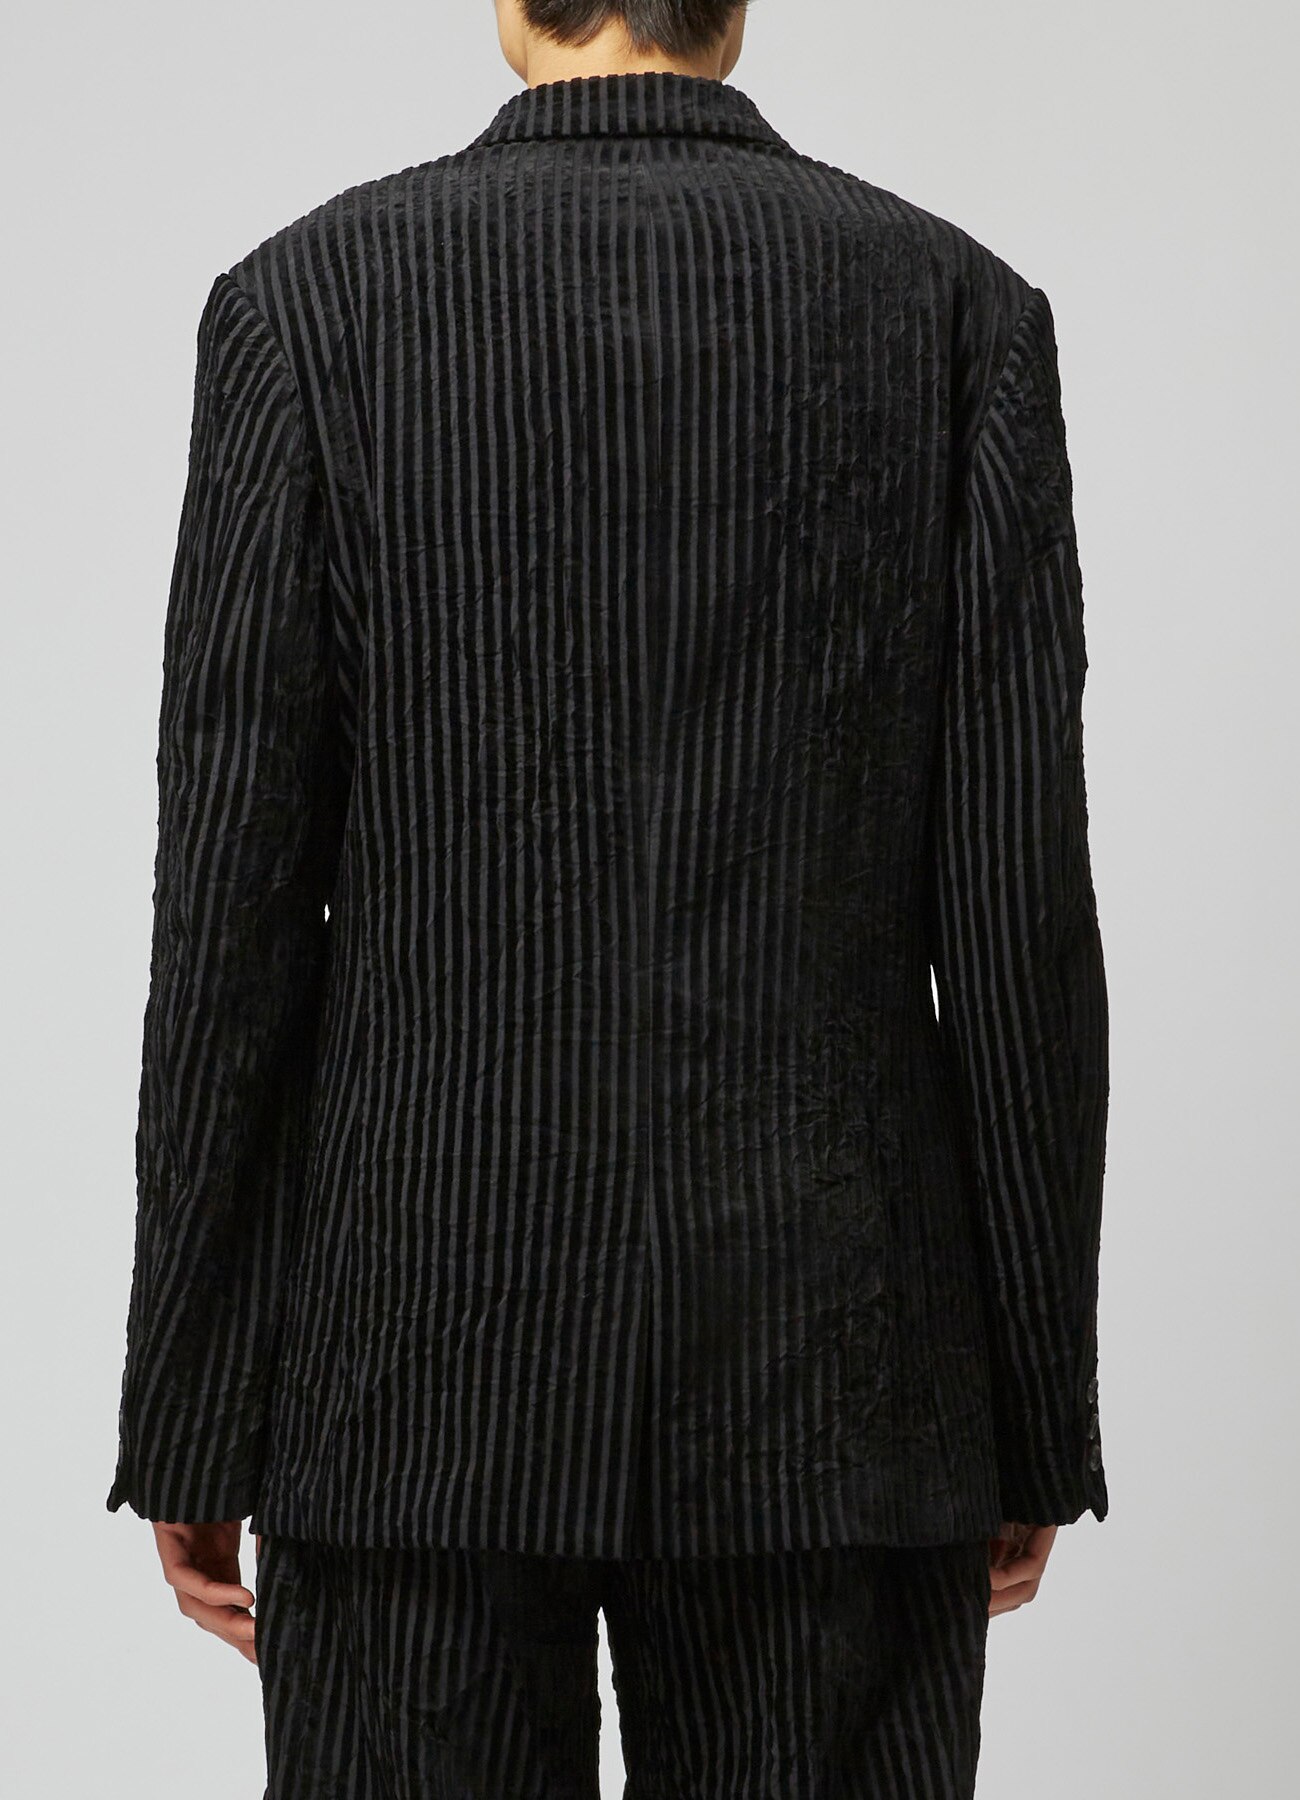 WRINKLED STRIPED 3-BUTTON JACKET WITH PEAK LAPELS(S GREY): Y's for